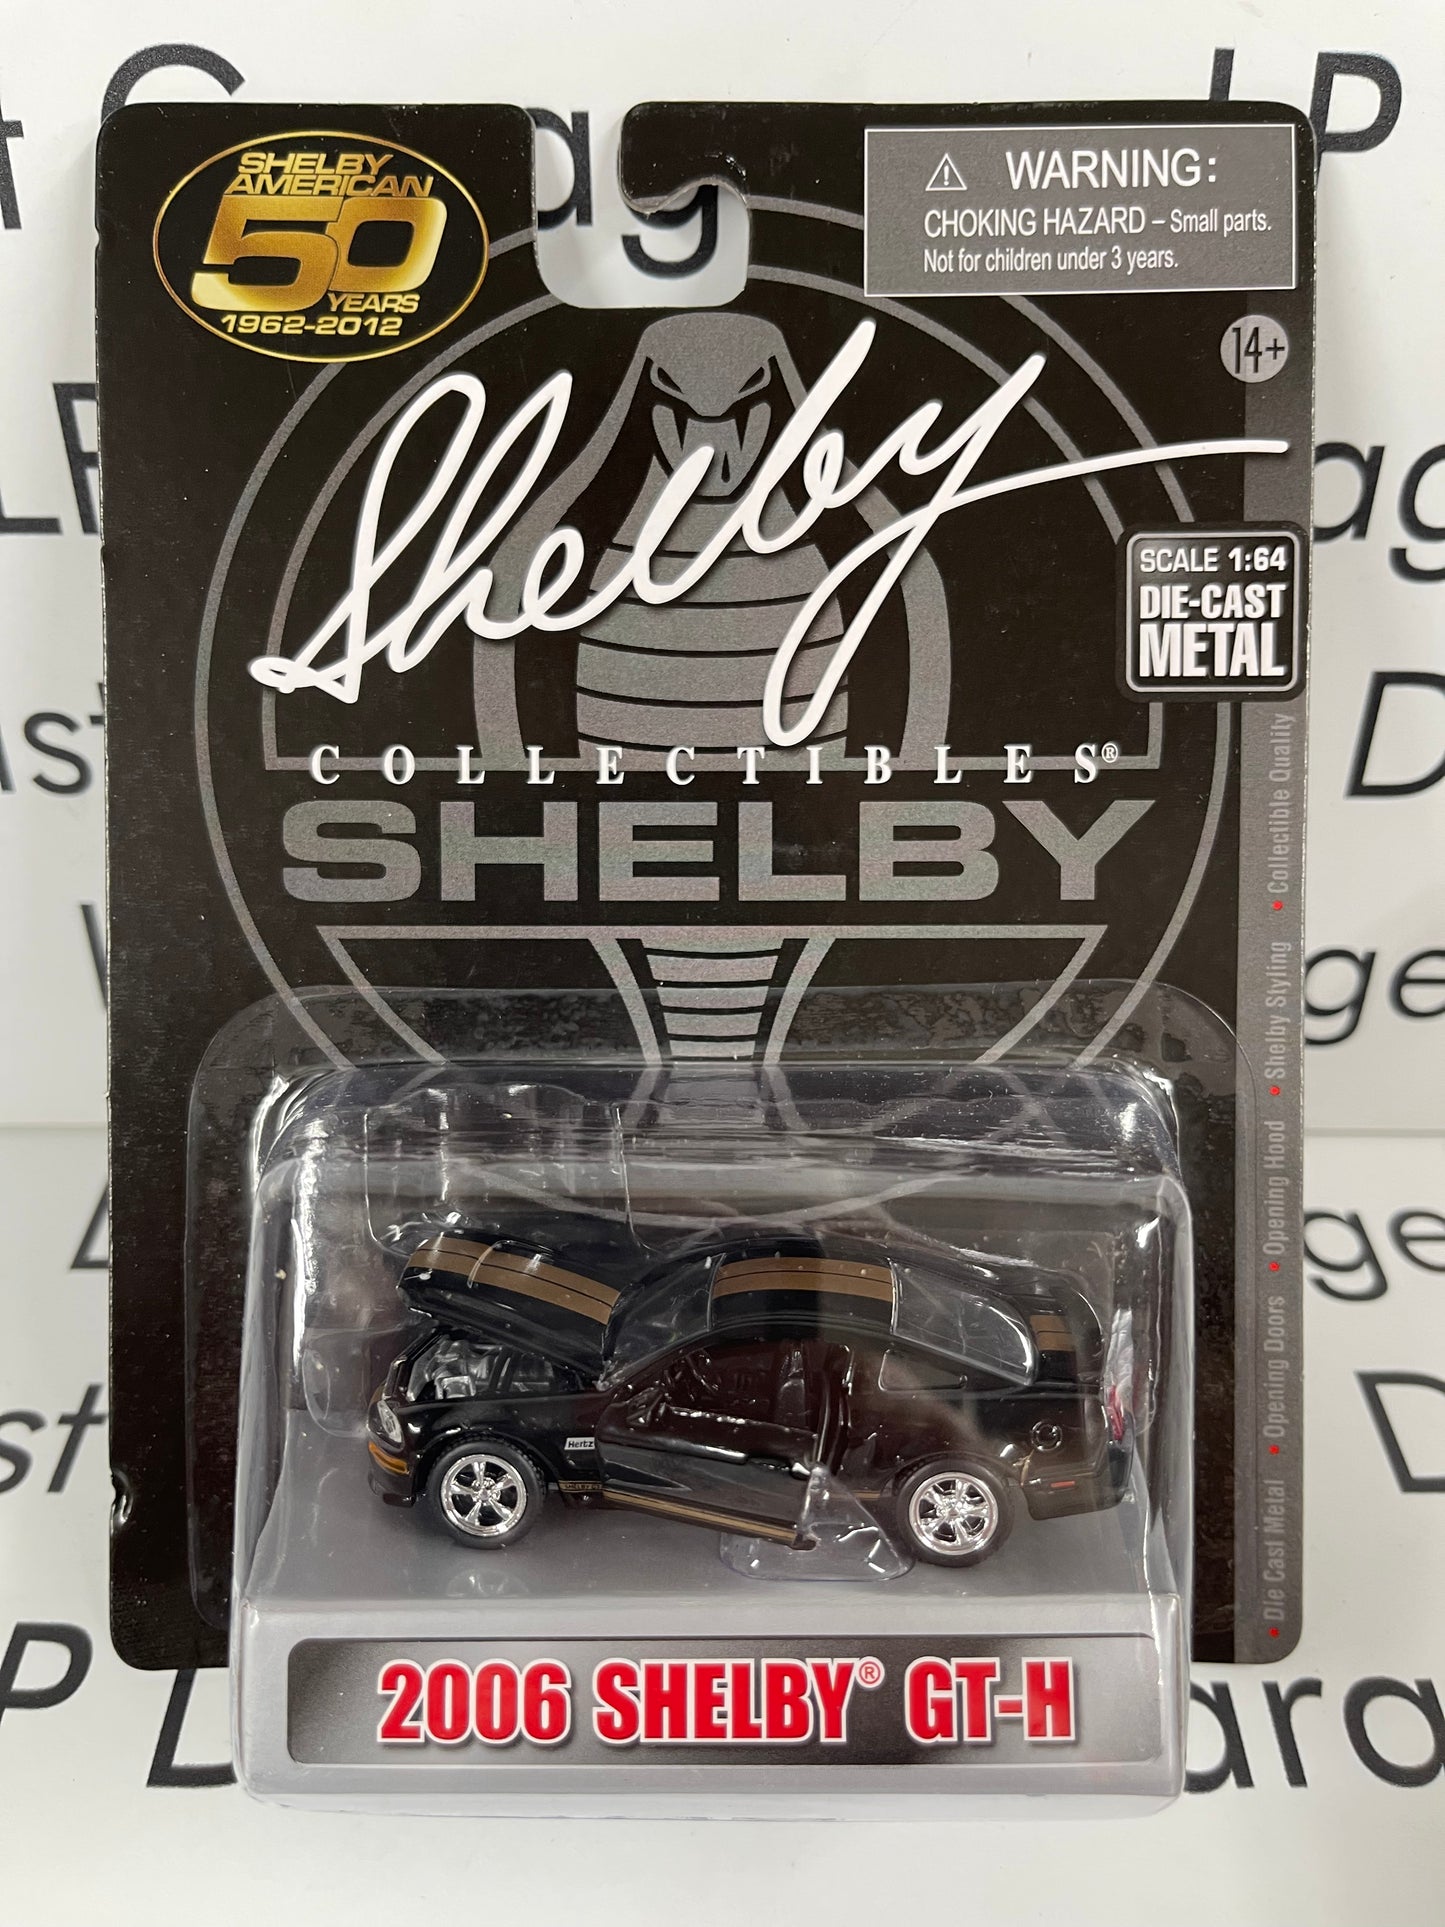 SHELBY COLLECTIBLES 2006 Ford Mustang Shelby GT-H Black Gold 1:64 Diecast